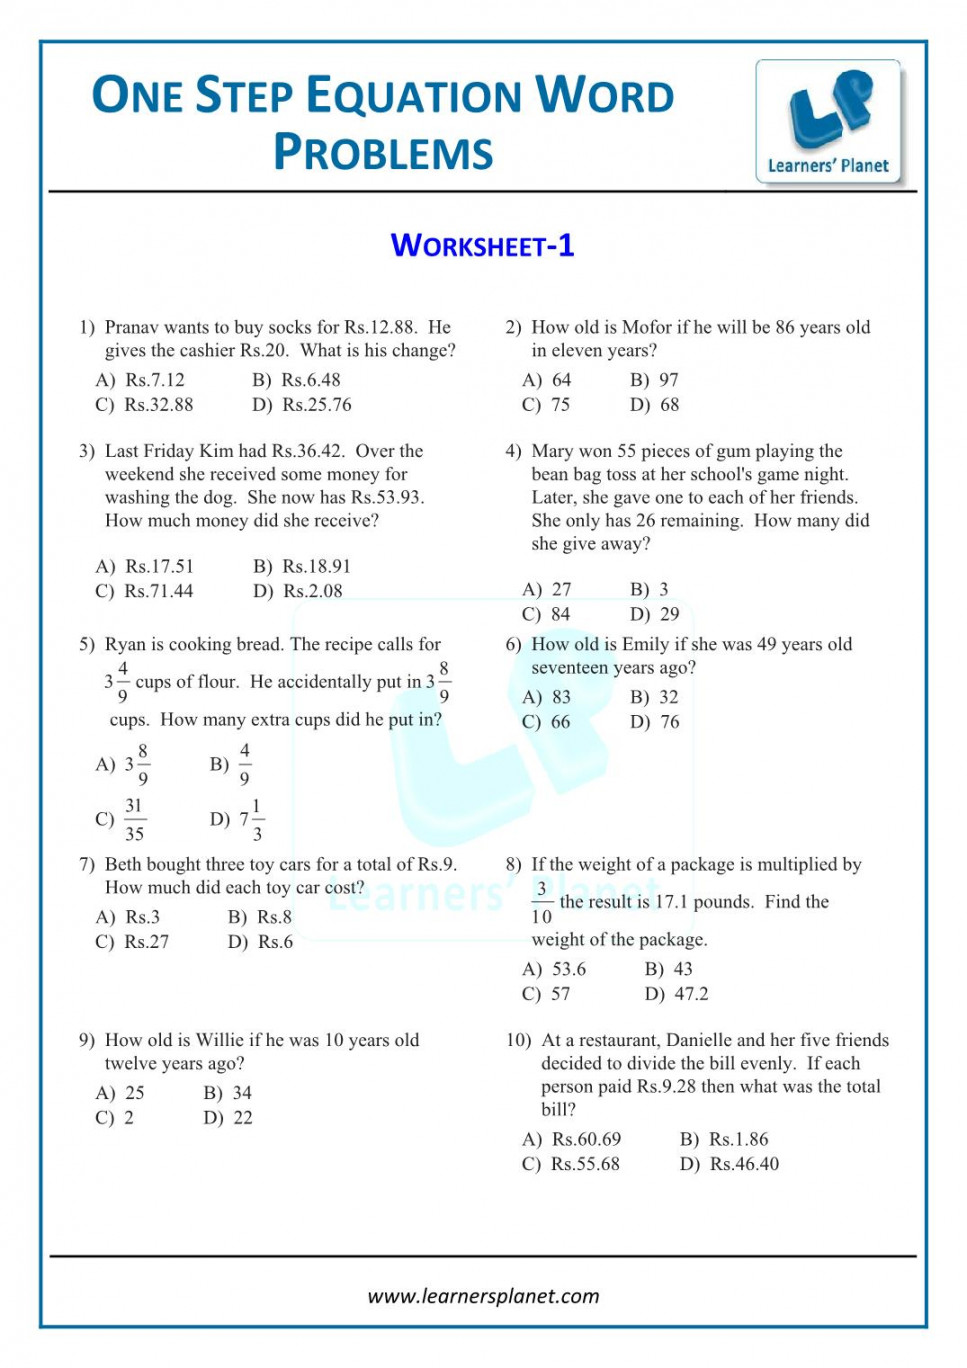 One step equations word problems worksheets grade